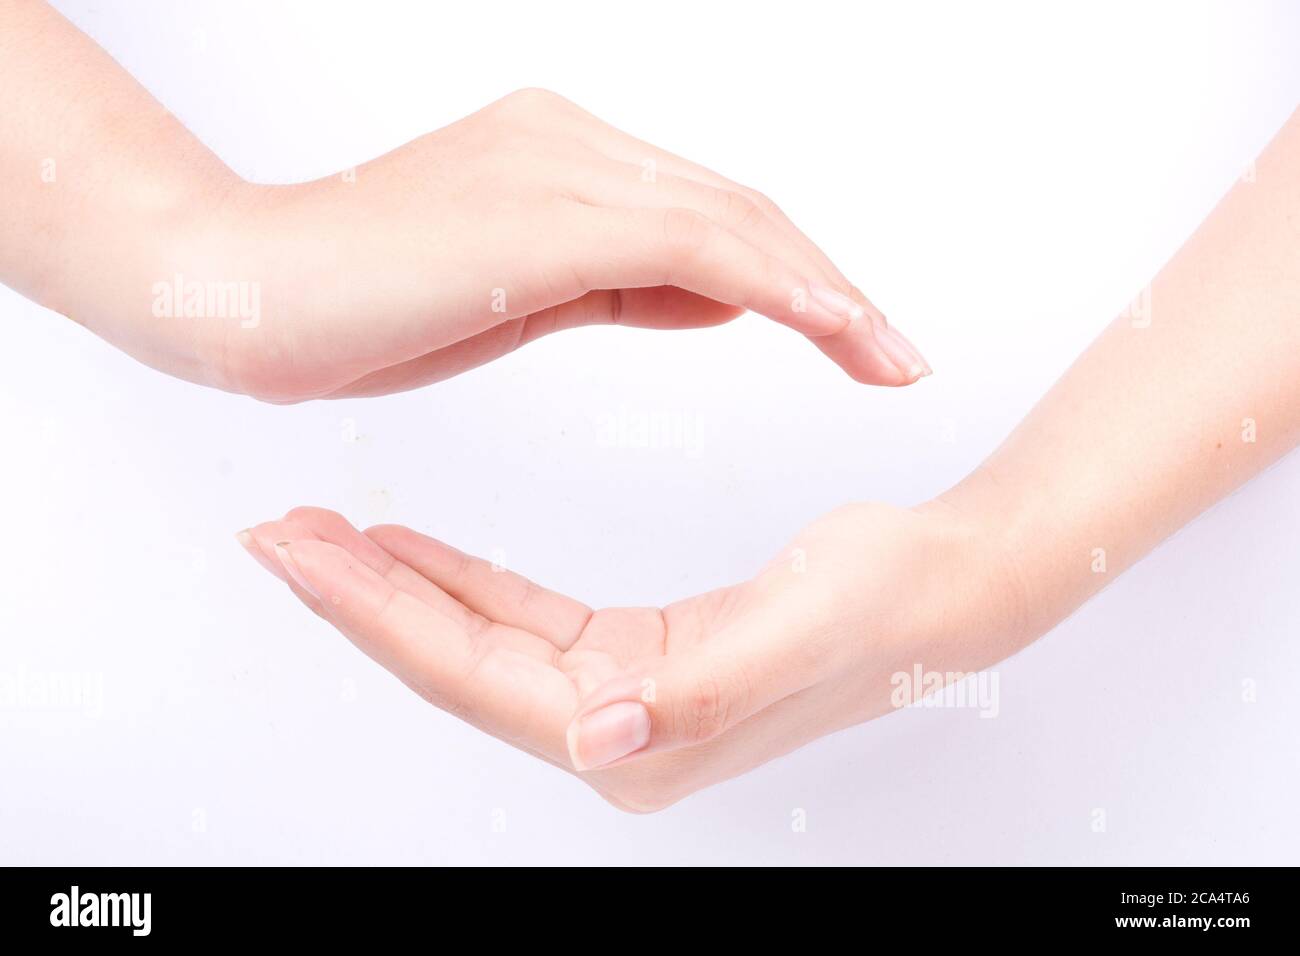 finger hand symbols isolated concept join two cupped hands and may the force be with you on white background Stock Photo